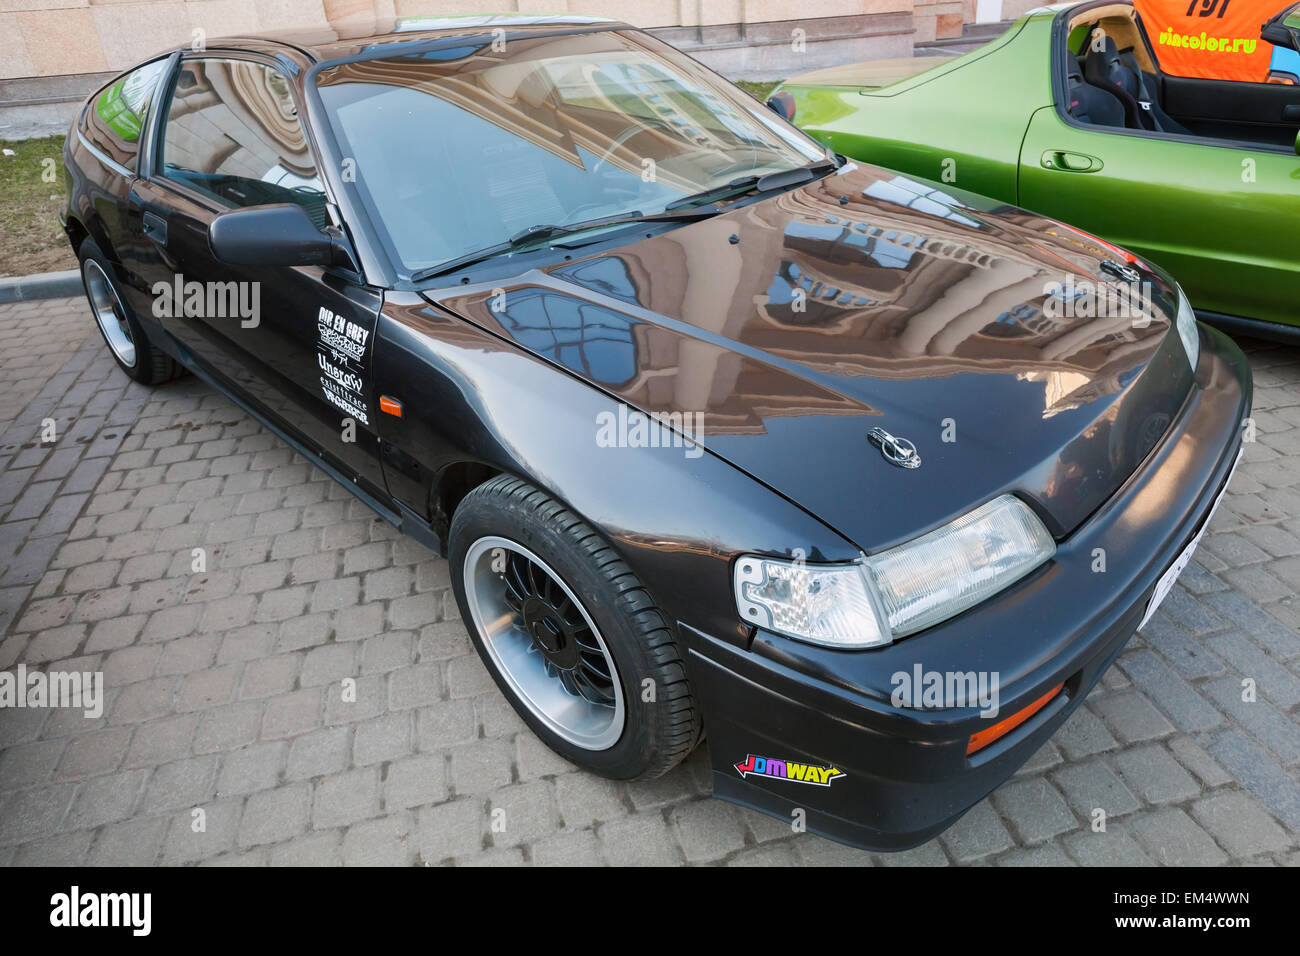 Saint-Petersburg, Russia - April 11, 2015: Black sporty Honda Civic CRX stands parked on the city street Stock Photo